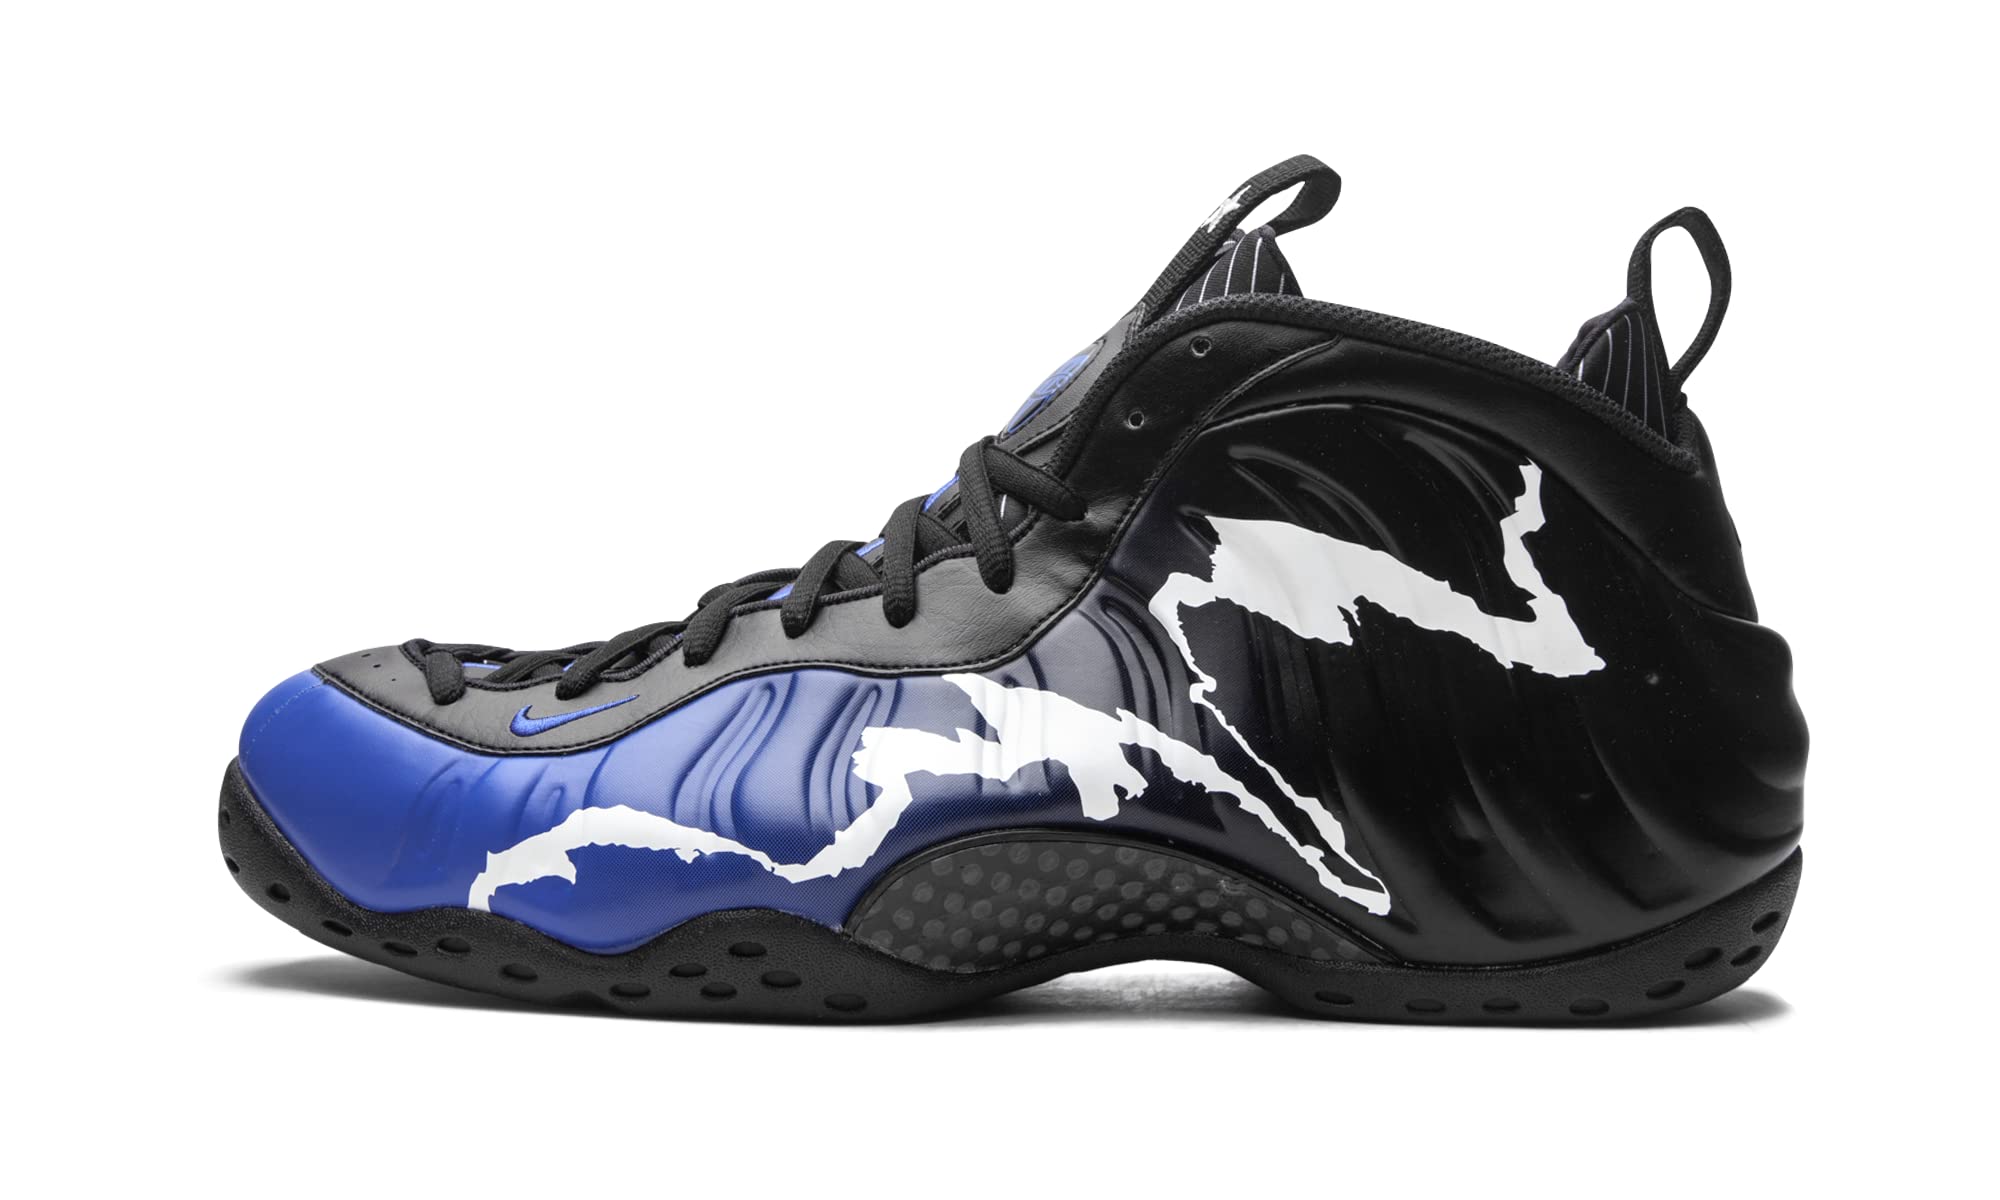 Nike Mens Air Foamposite One CN0055 001 96 All Star - Size 6 Black/Game Royal-White